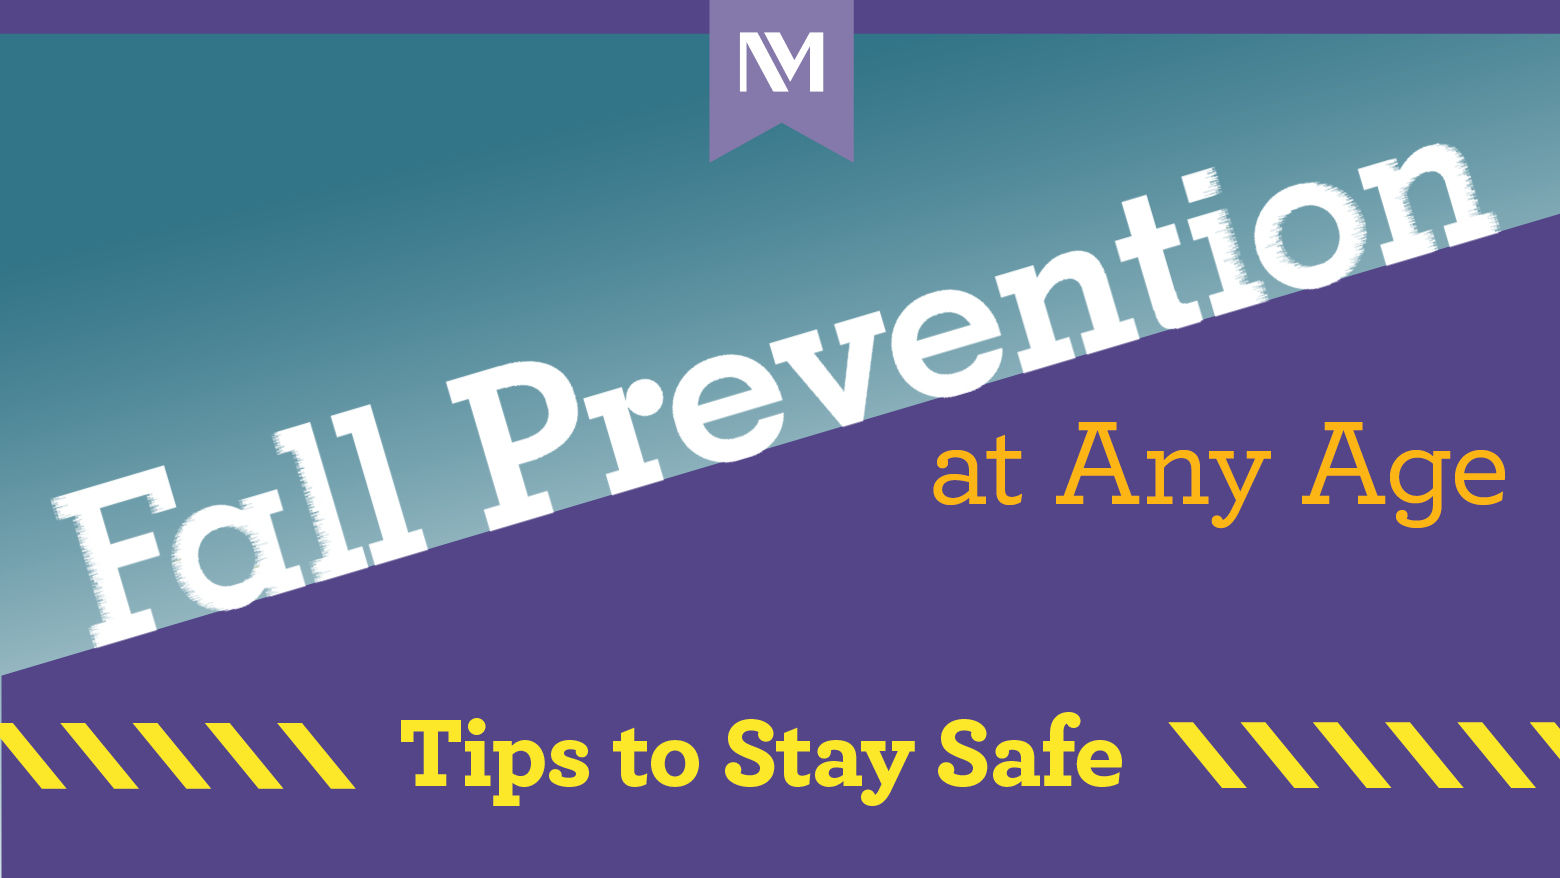 Graphic with NM logo at top, headline "Fall Prevention at Any Age" and subheading "Tips to Stay Safe."